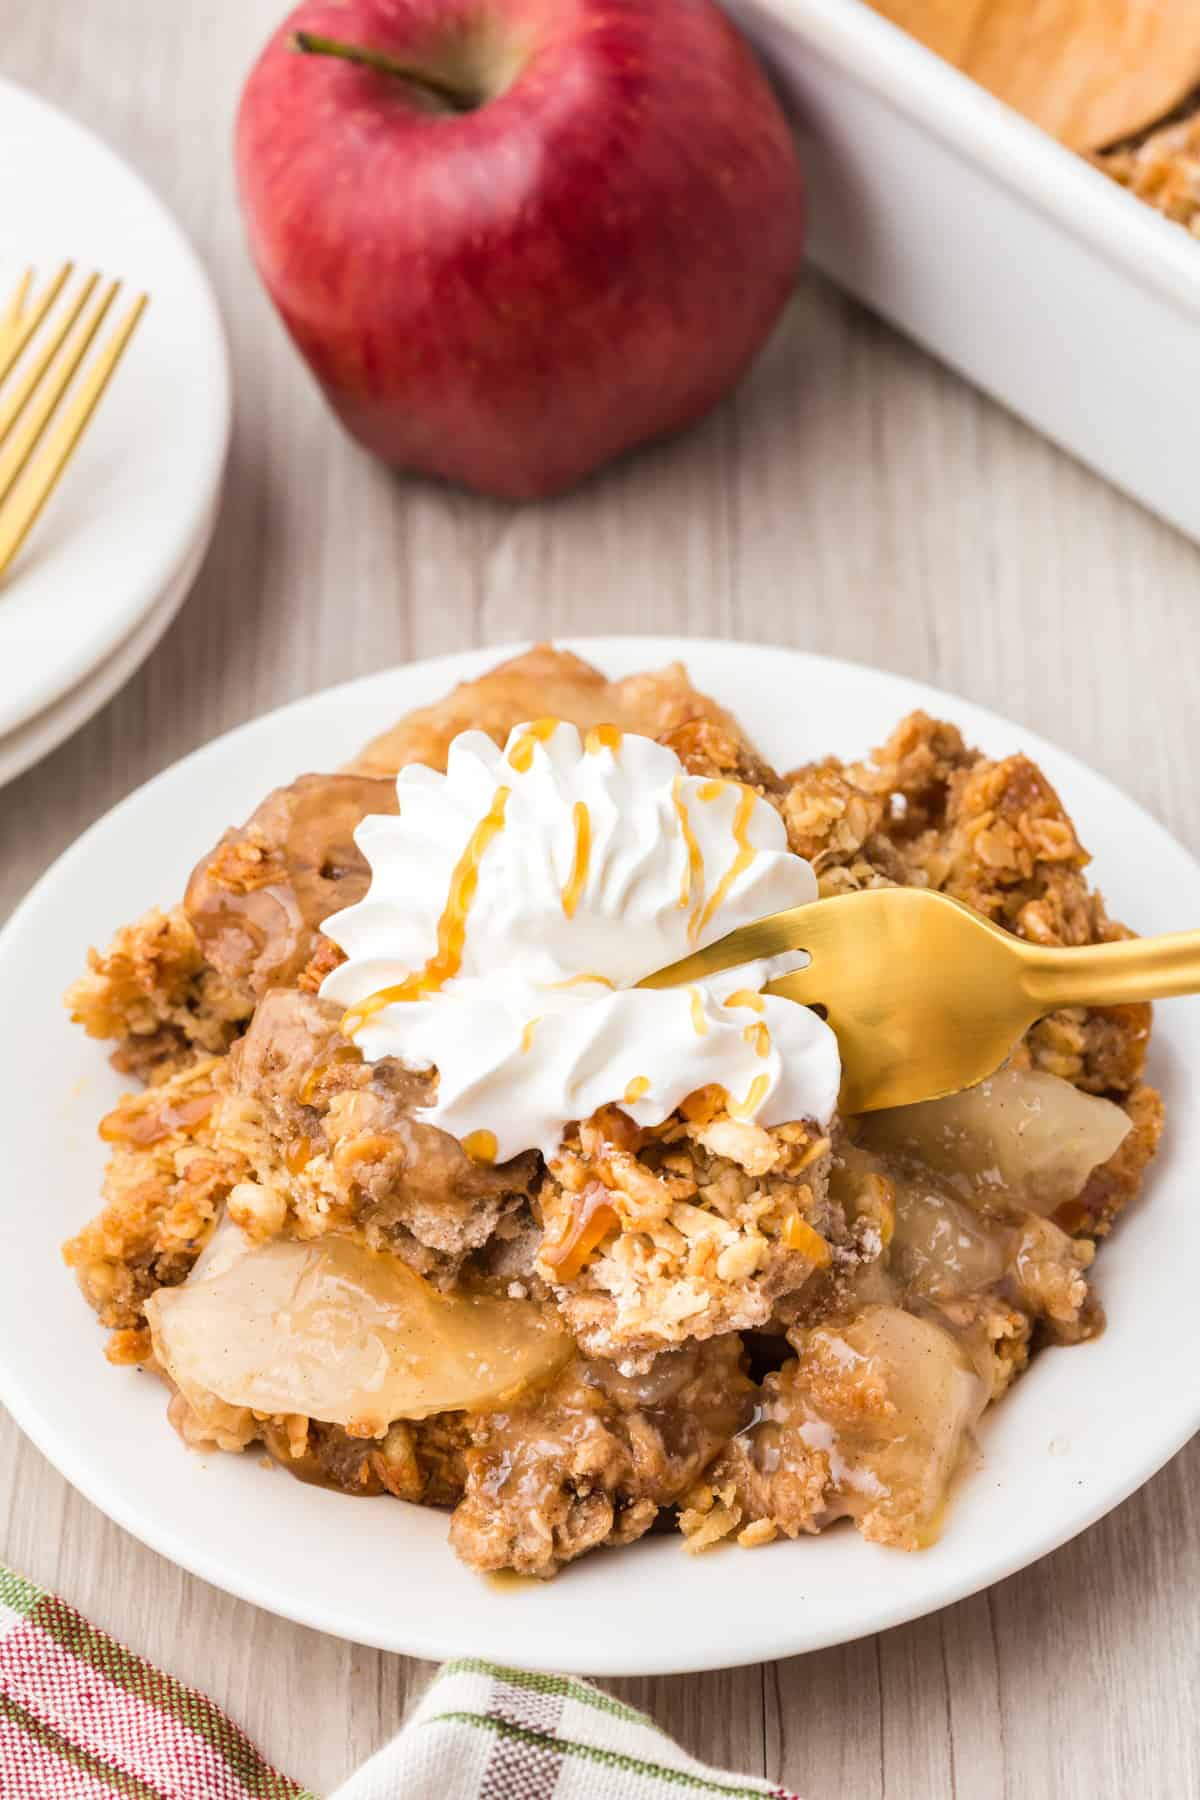 Form digging into a piece of apple crisp off plate.